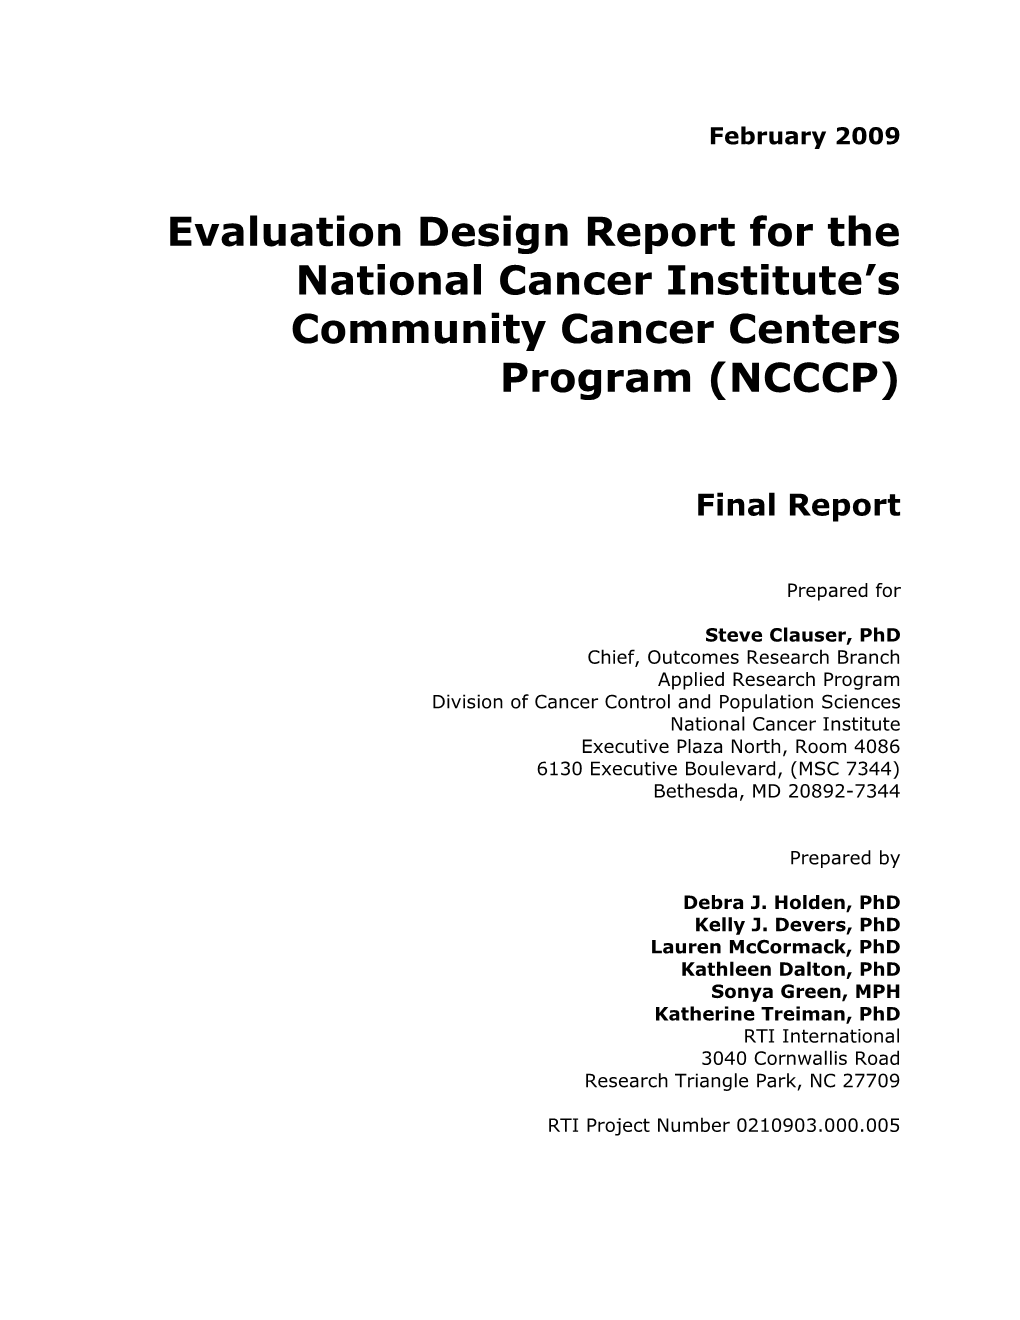 Evaluation Design Report for the National Cancer Institute's